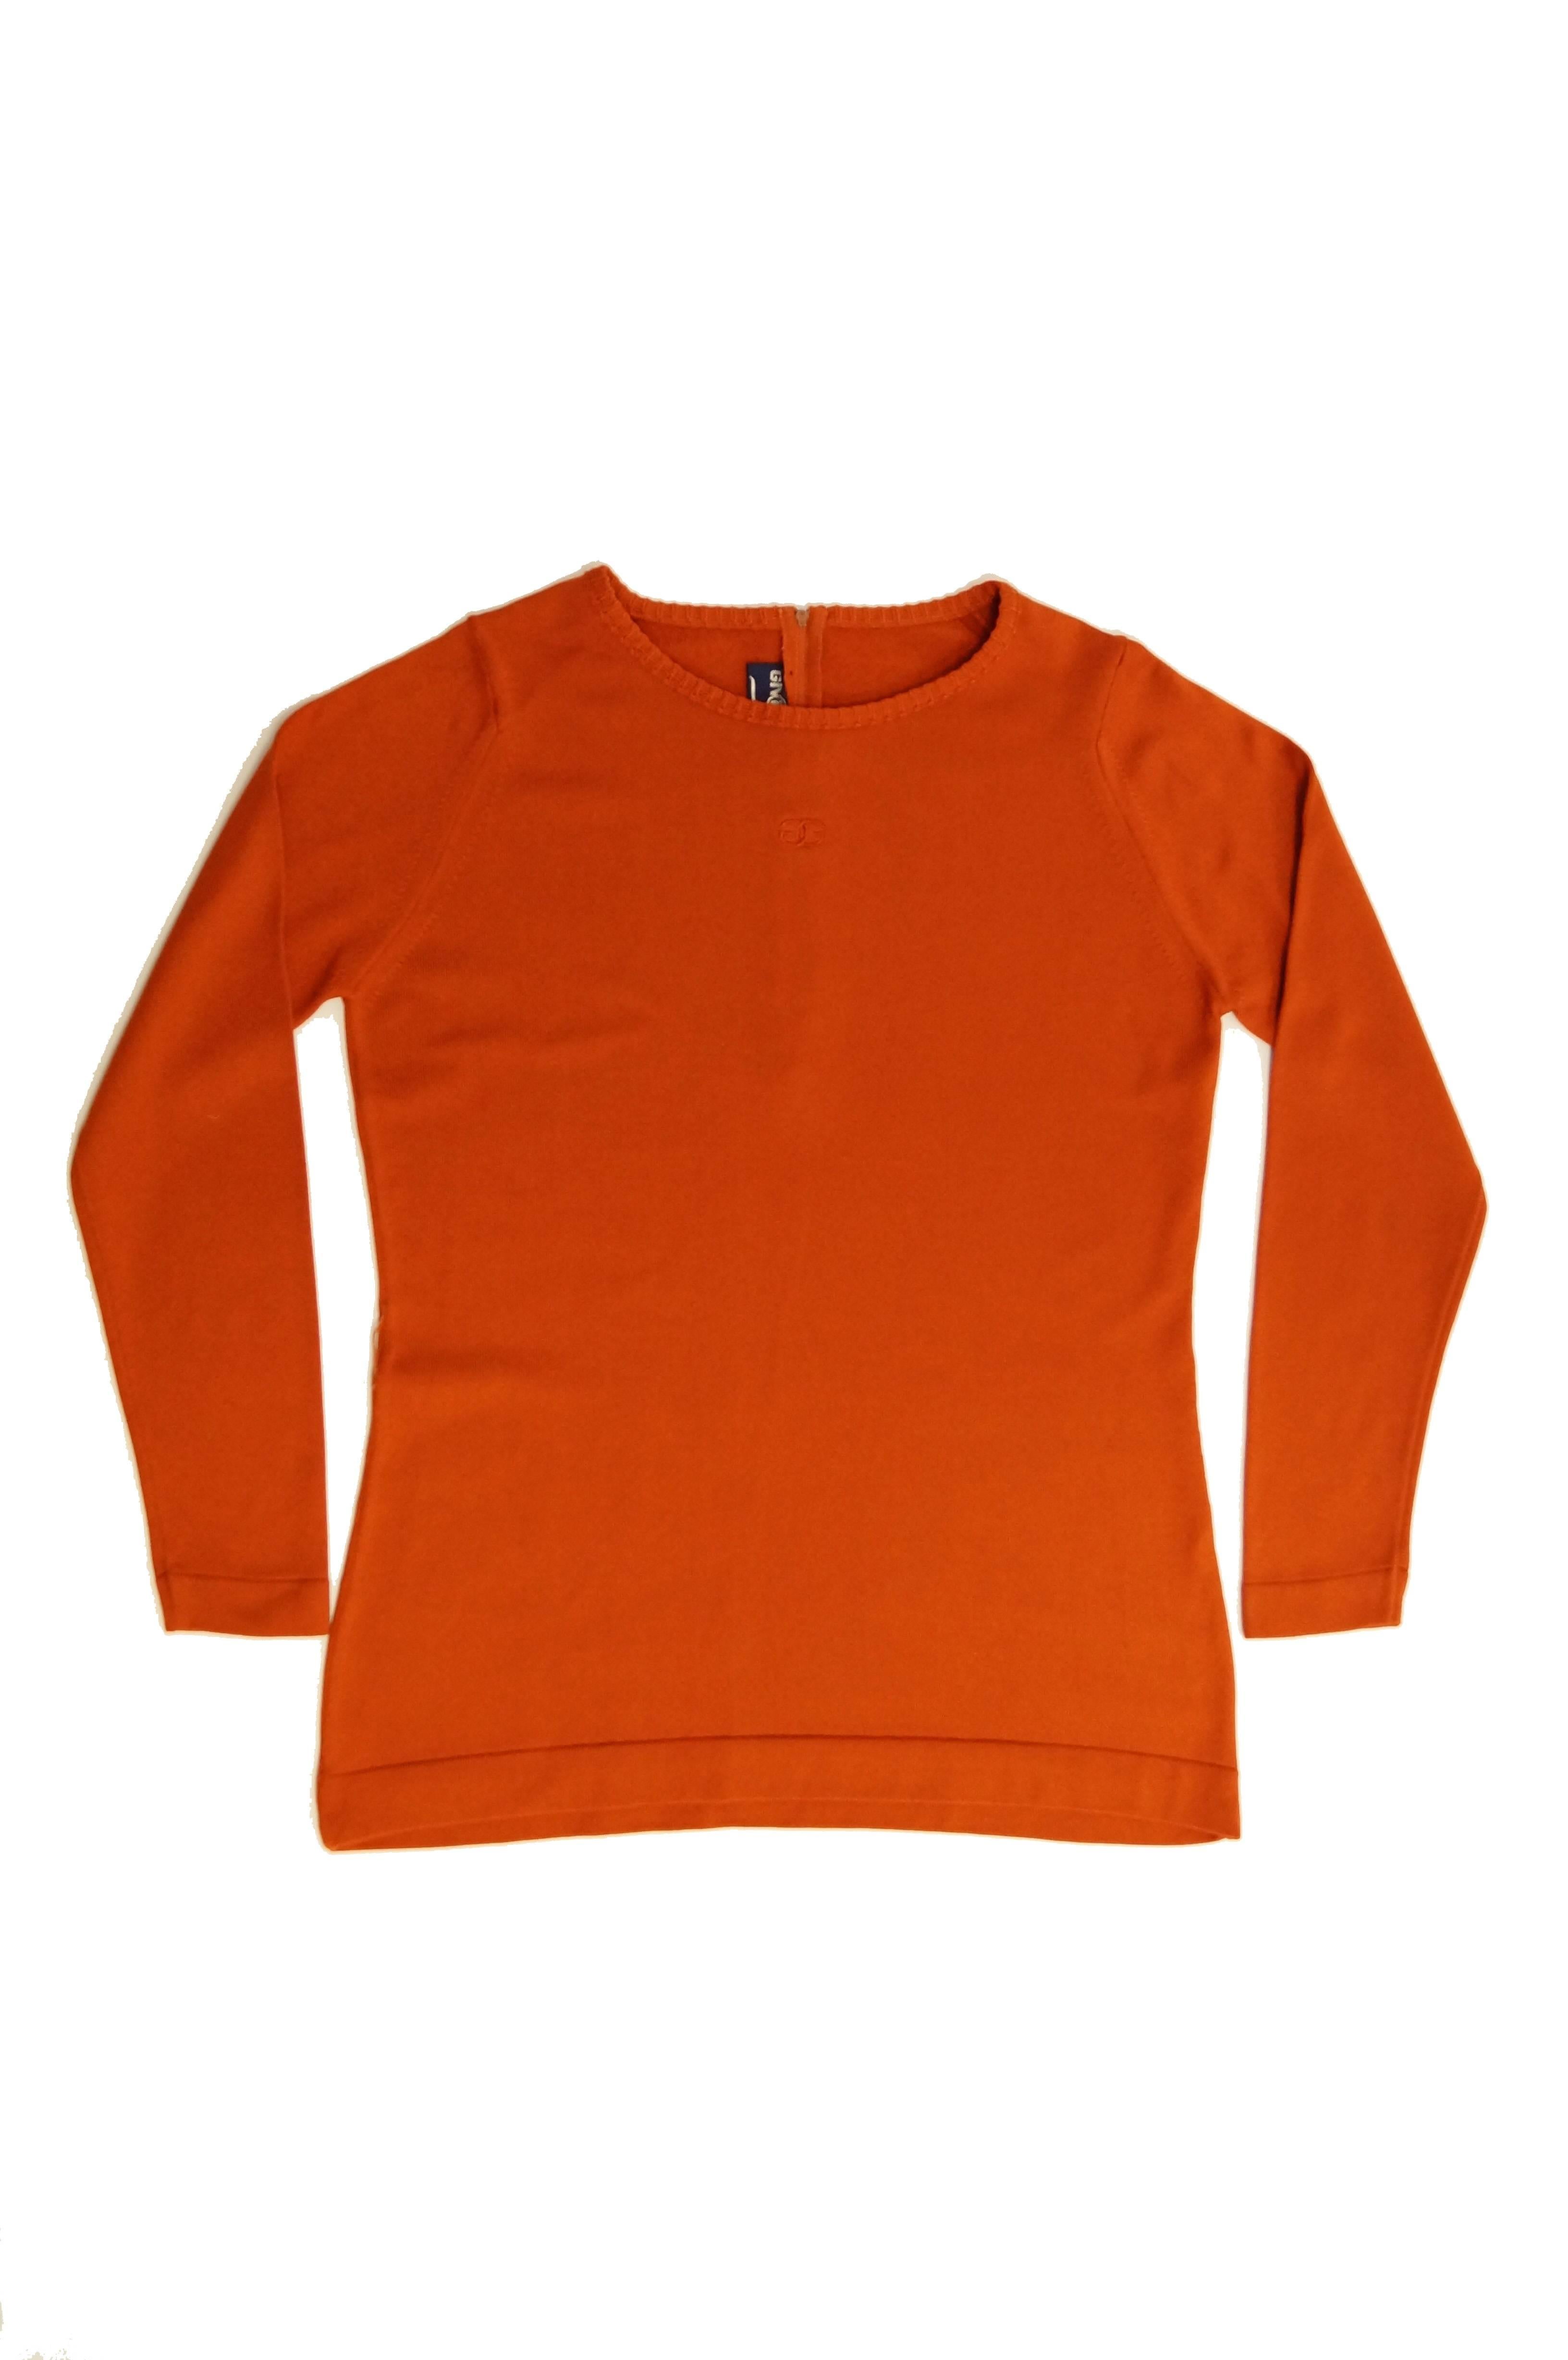 Givenchy Sport Tangerine Orange Pullover Sweater, 1970s  5